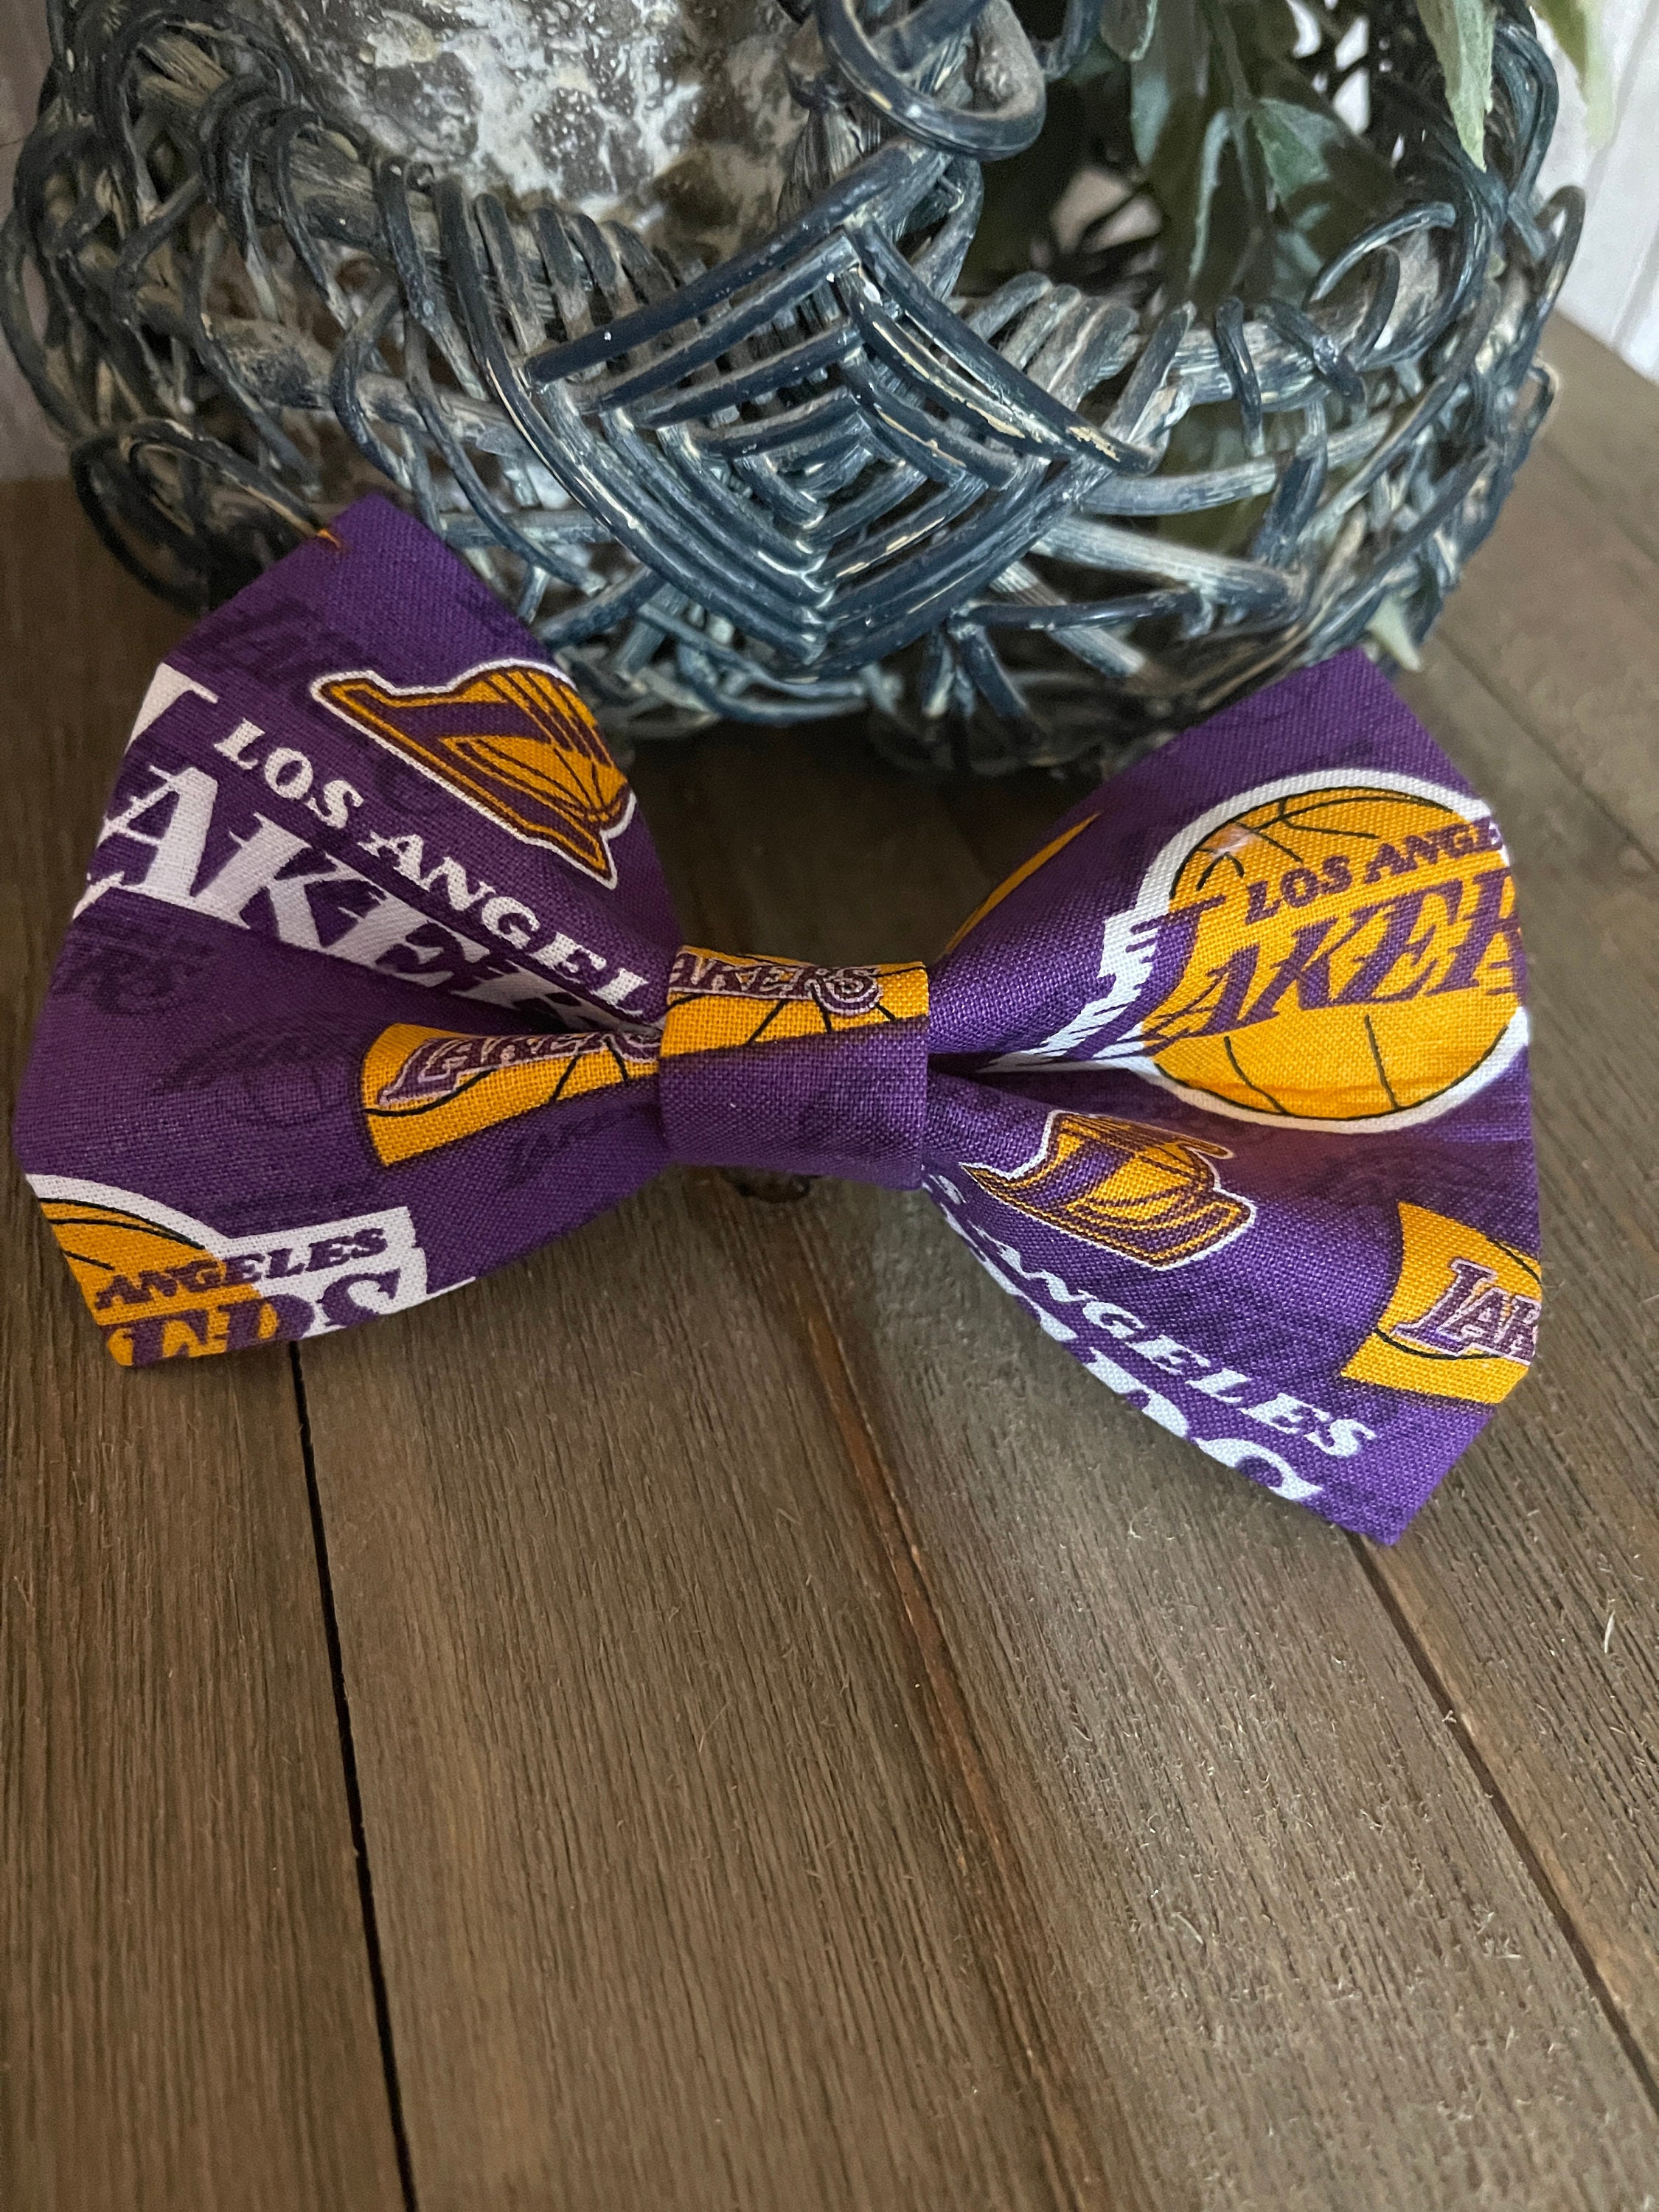 LA Lakers Tie Inspired by the Los Angeles Lakers Basketball 